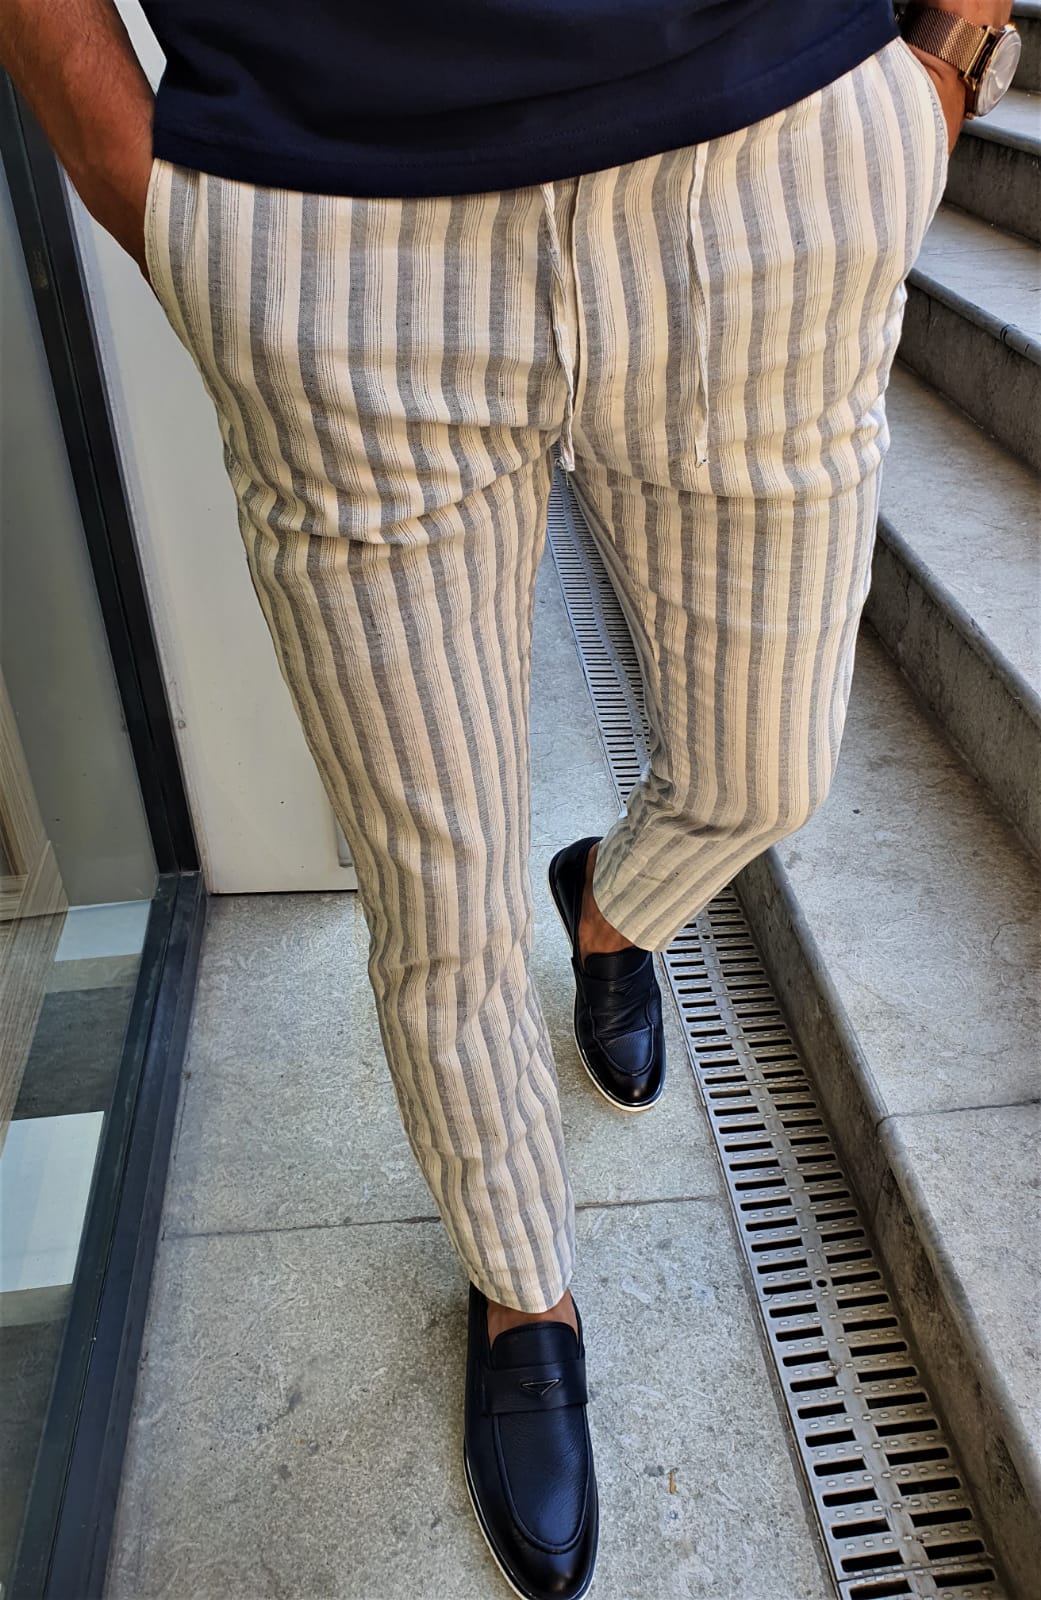 https://gentwith.com/wp-content/uploads/2020/08/GentWith-Newark-Navy-Blue-Slim-Fit-Laced-Striped-Linen-Pants-1.jpeg